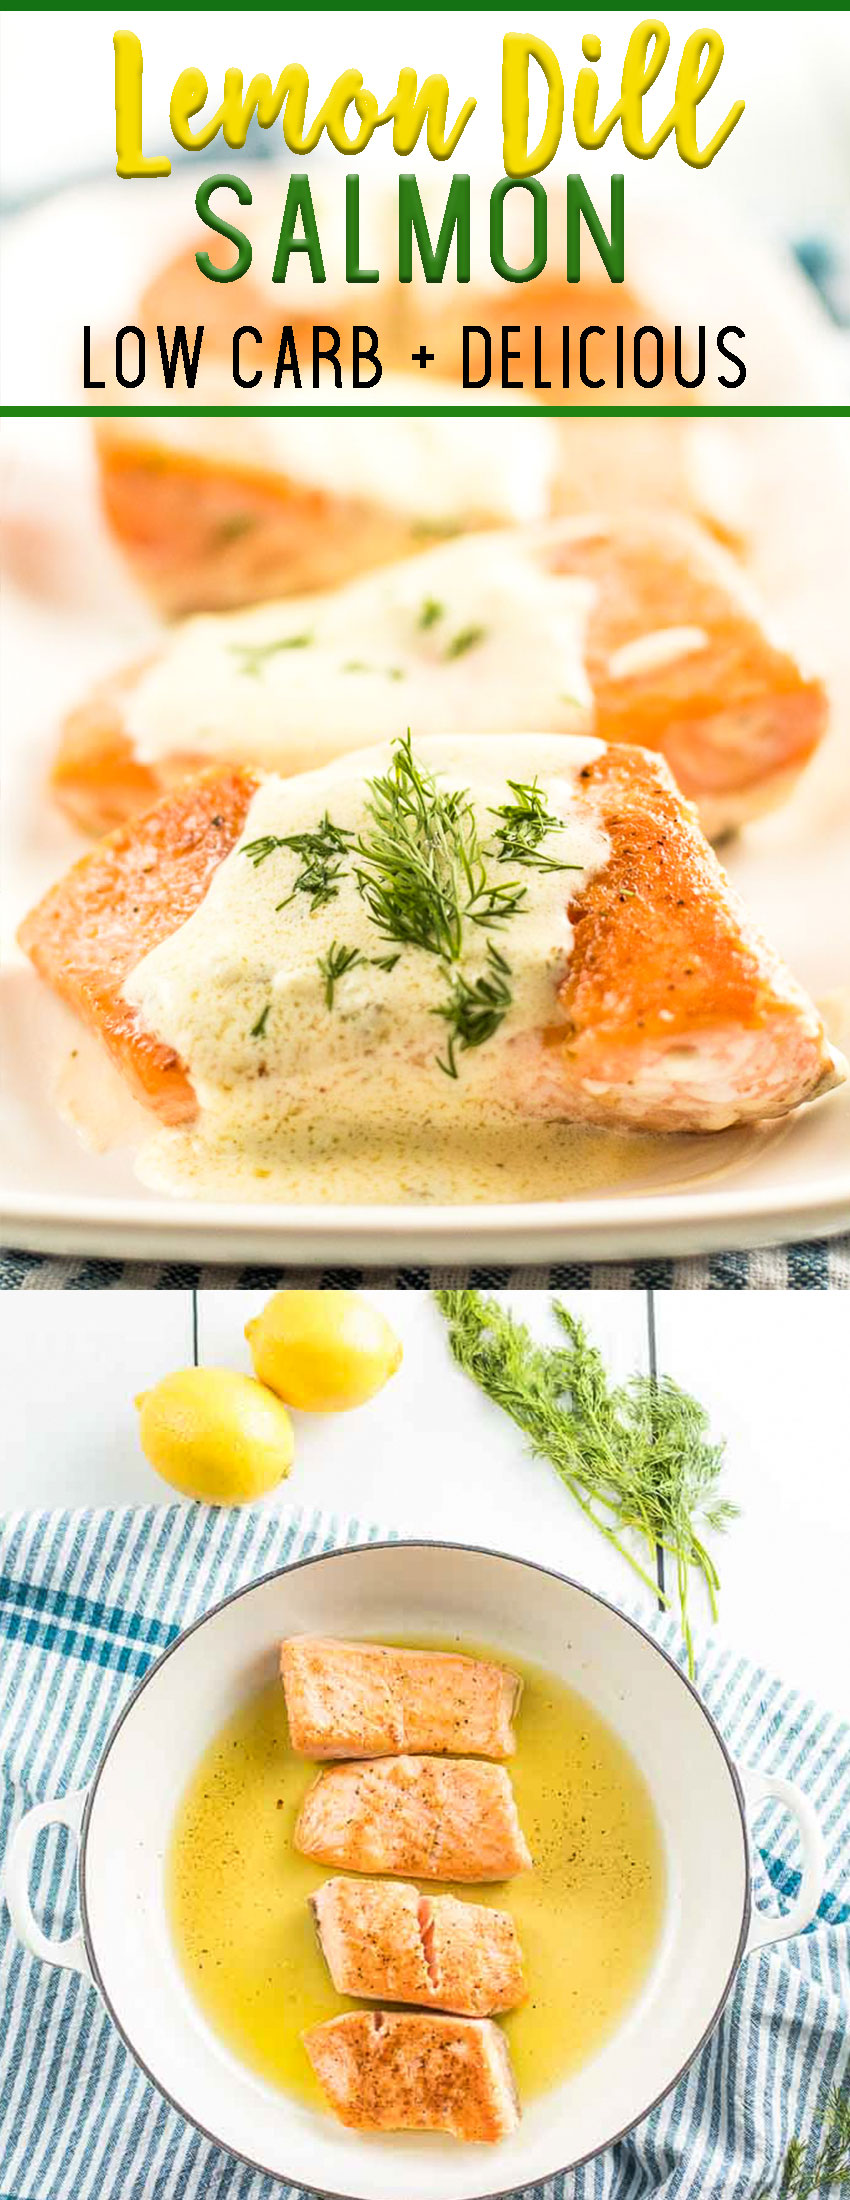 Lemon Dill Salmon, low carb salmon recipe that is so delicious